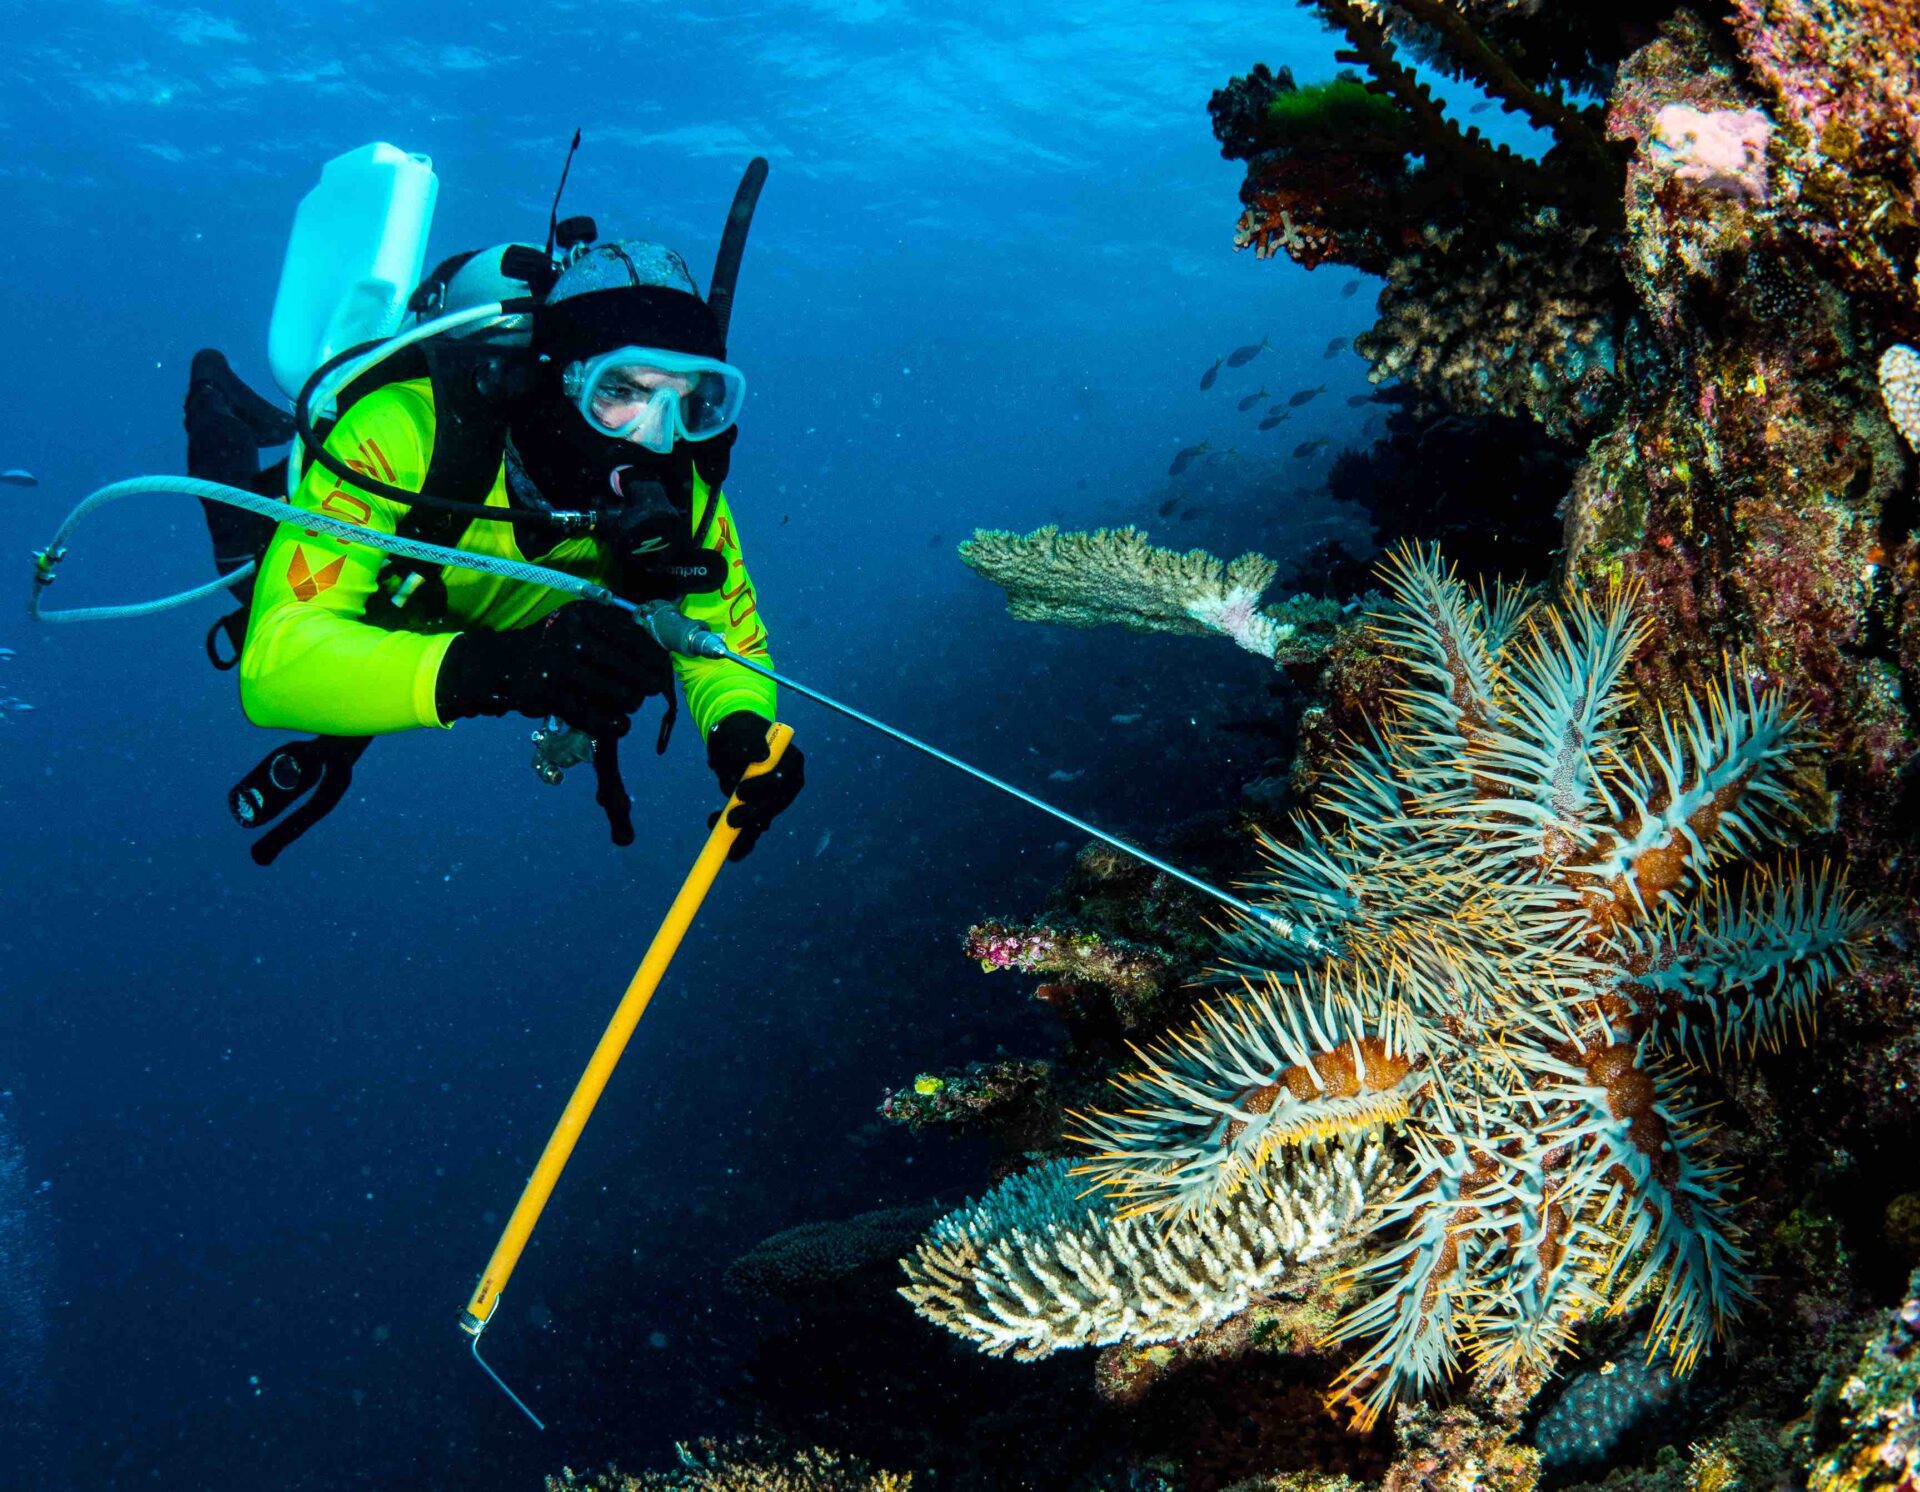 $9.8 Million Program to Protect Corals from Starfish